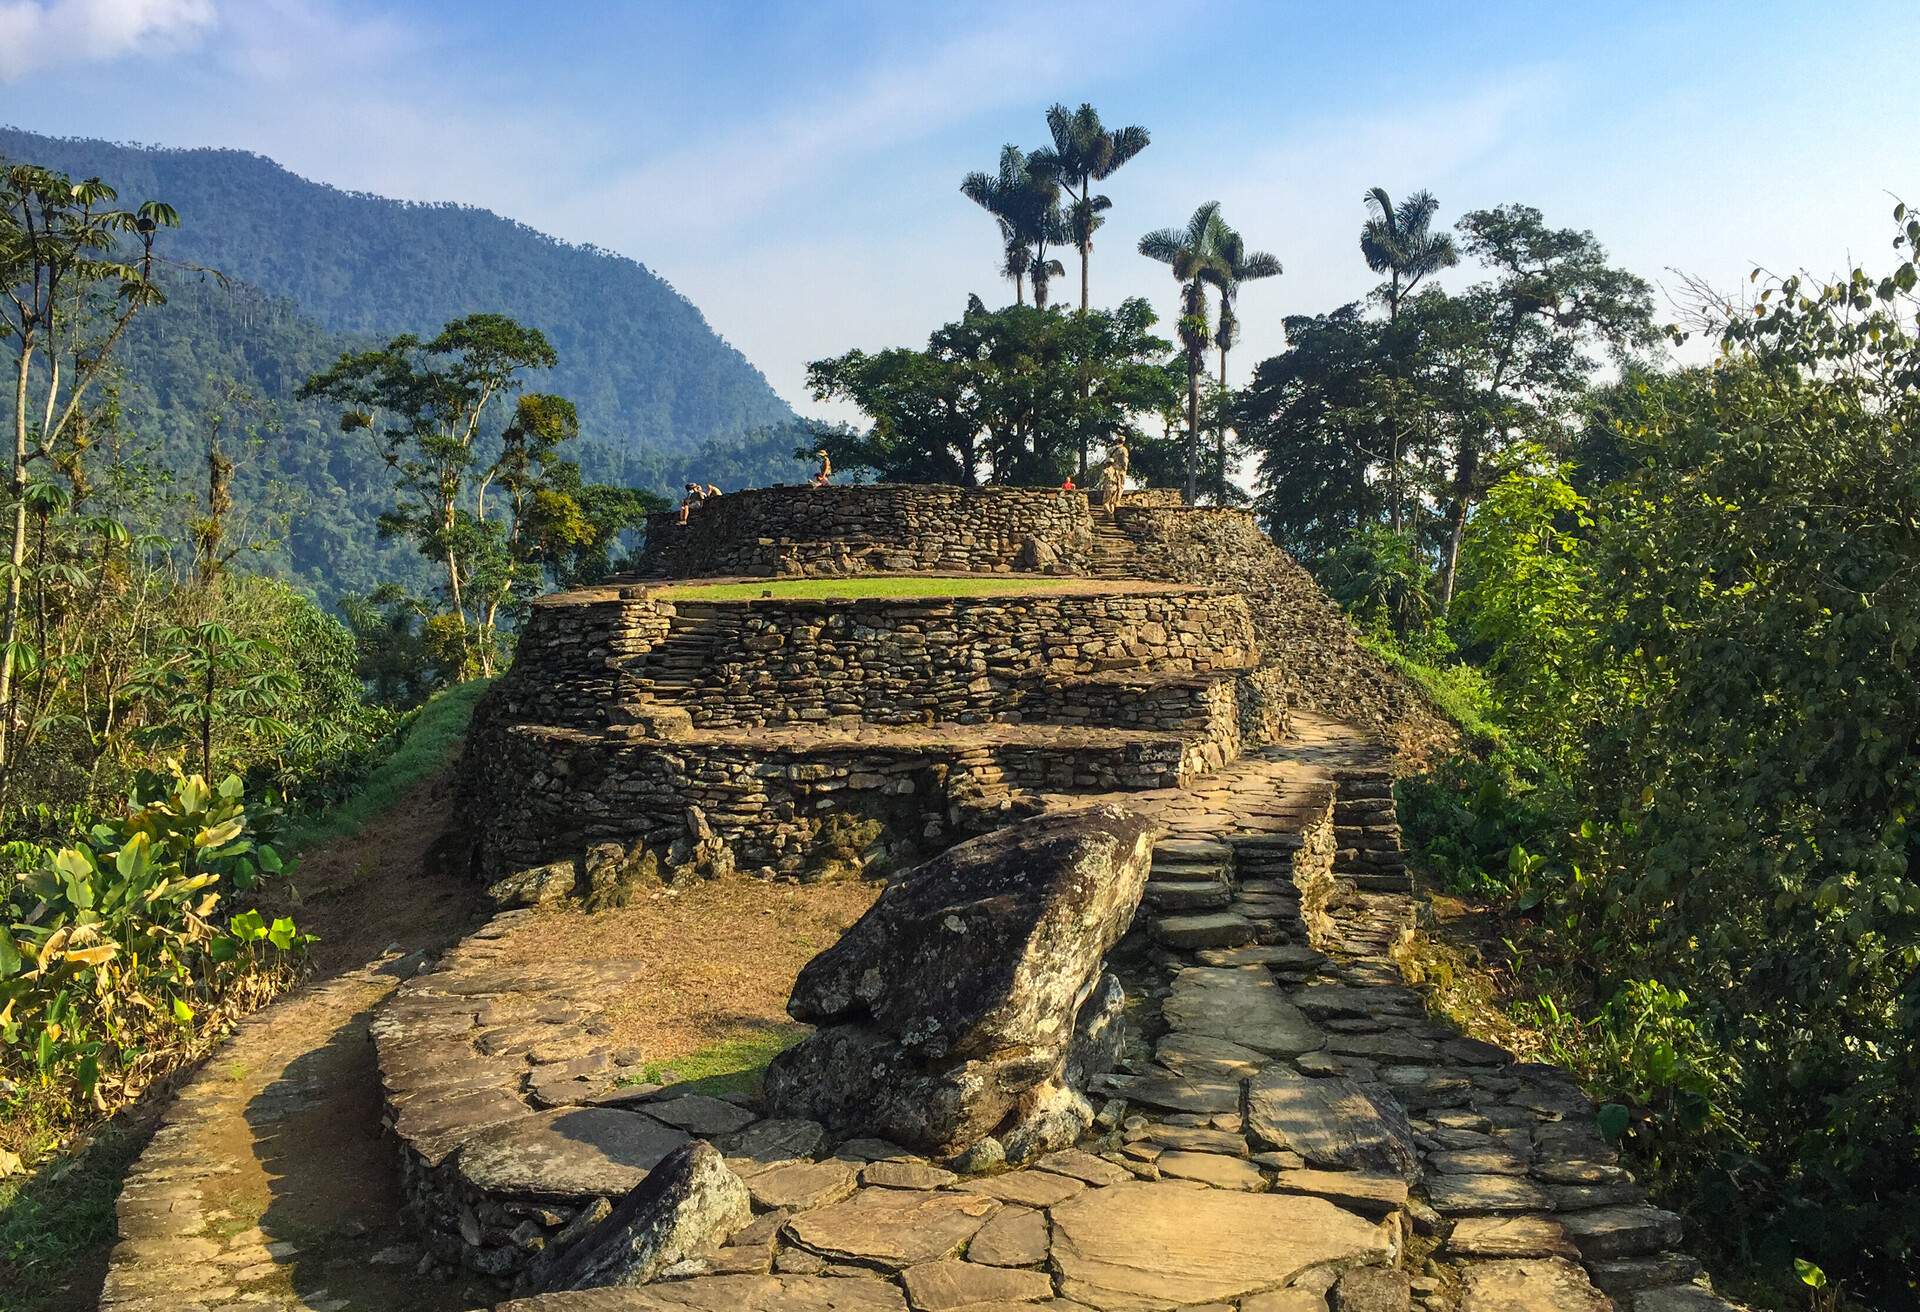 The Famous and Tourist Tayrona Park, the Ciudad Perdida (Lost City) in Magdalena / Colombia, full of Nature, Vegetation, History and Culture